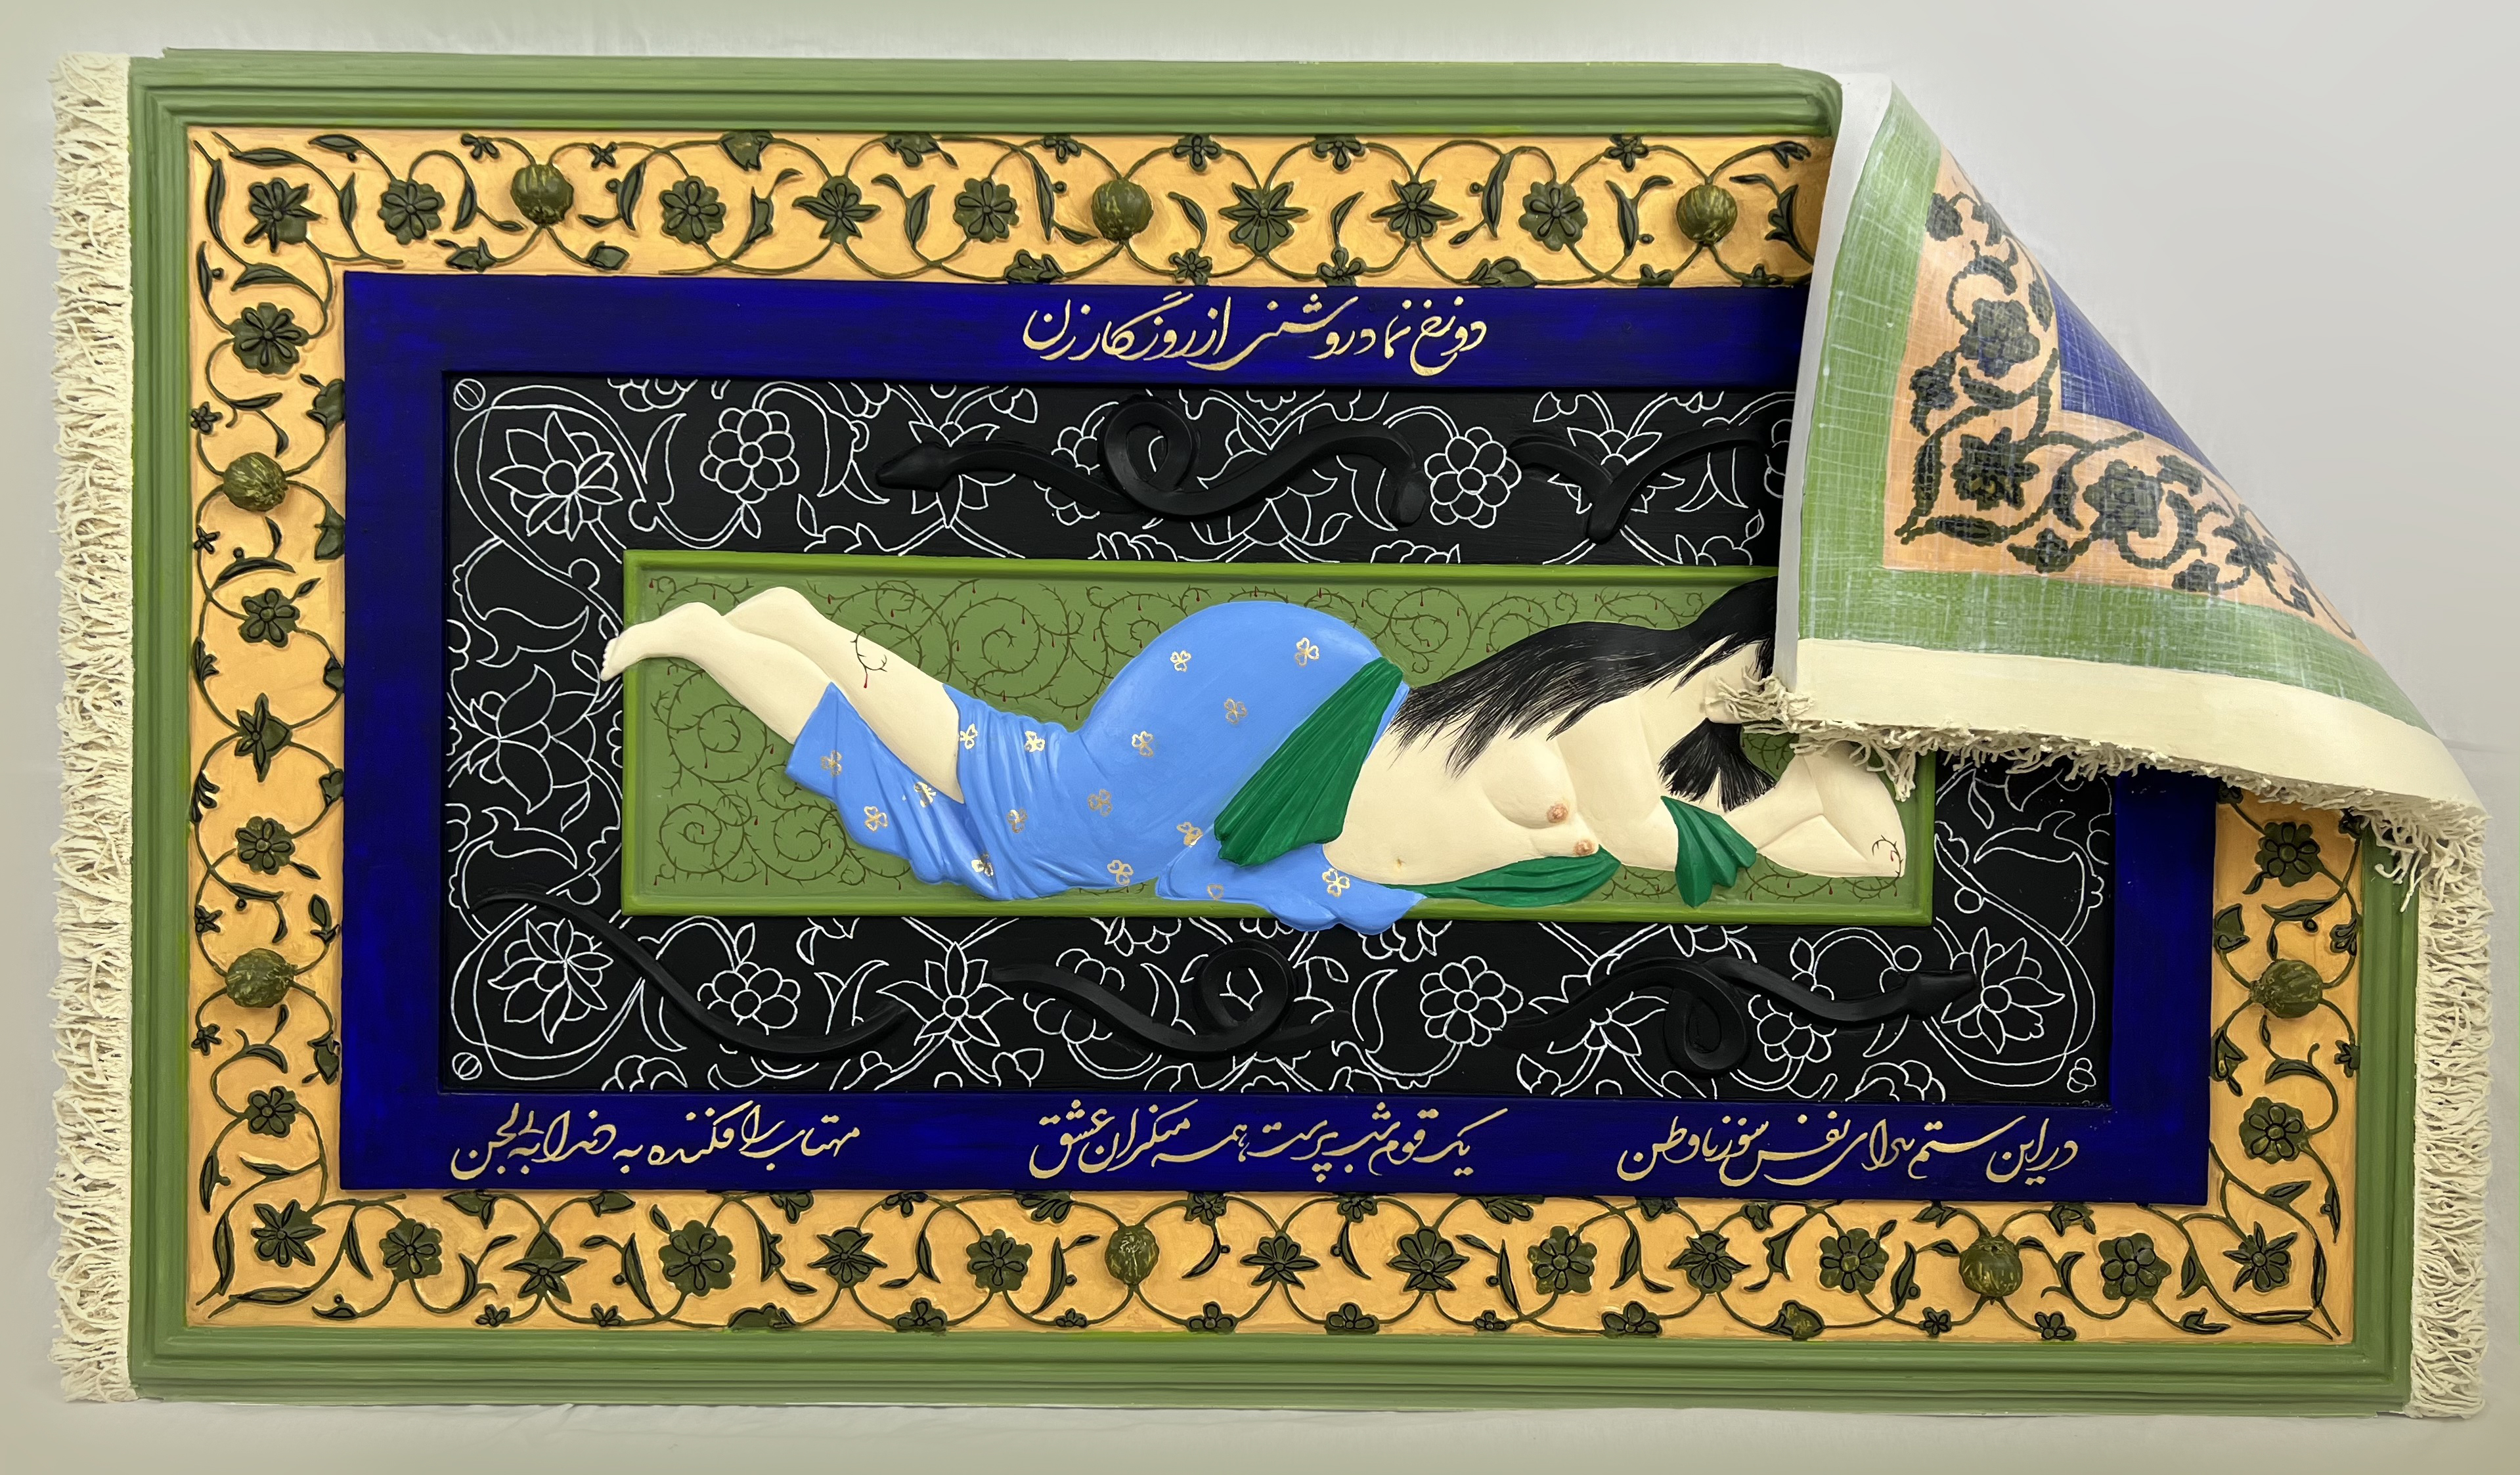 Image of some of the latest work that Rada Akbar has done inspired by old Persian miniature paintings and contemporary artistry